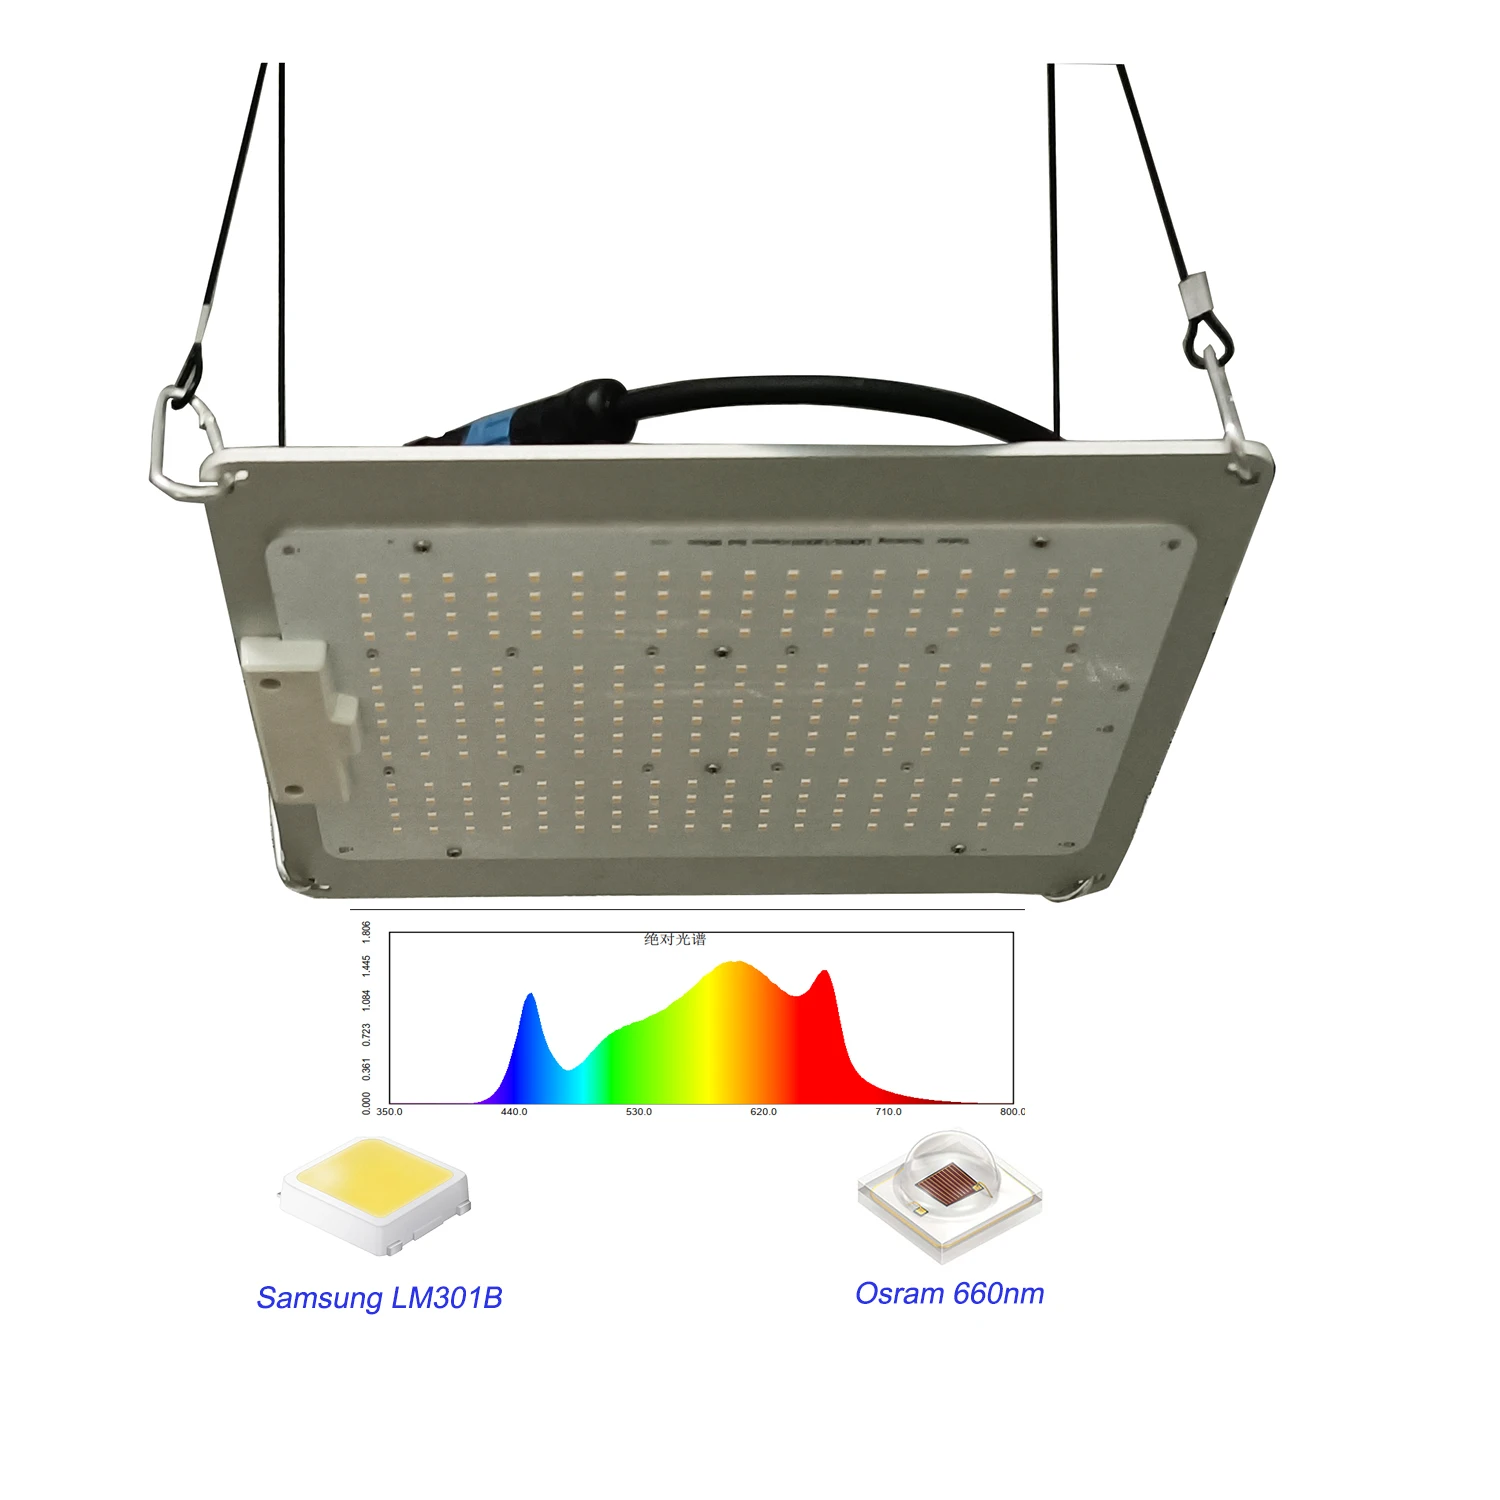 2020 New Arrival 120W lm301h Osrm 660nm led grow light